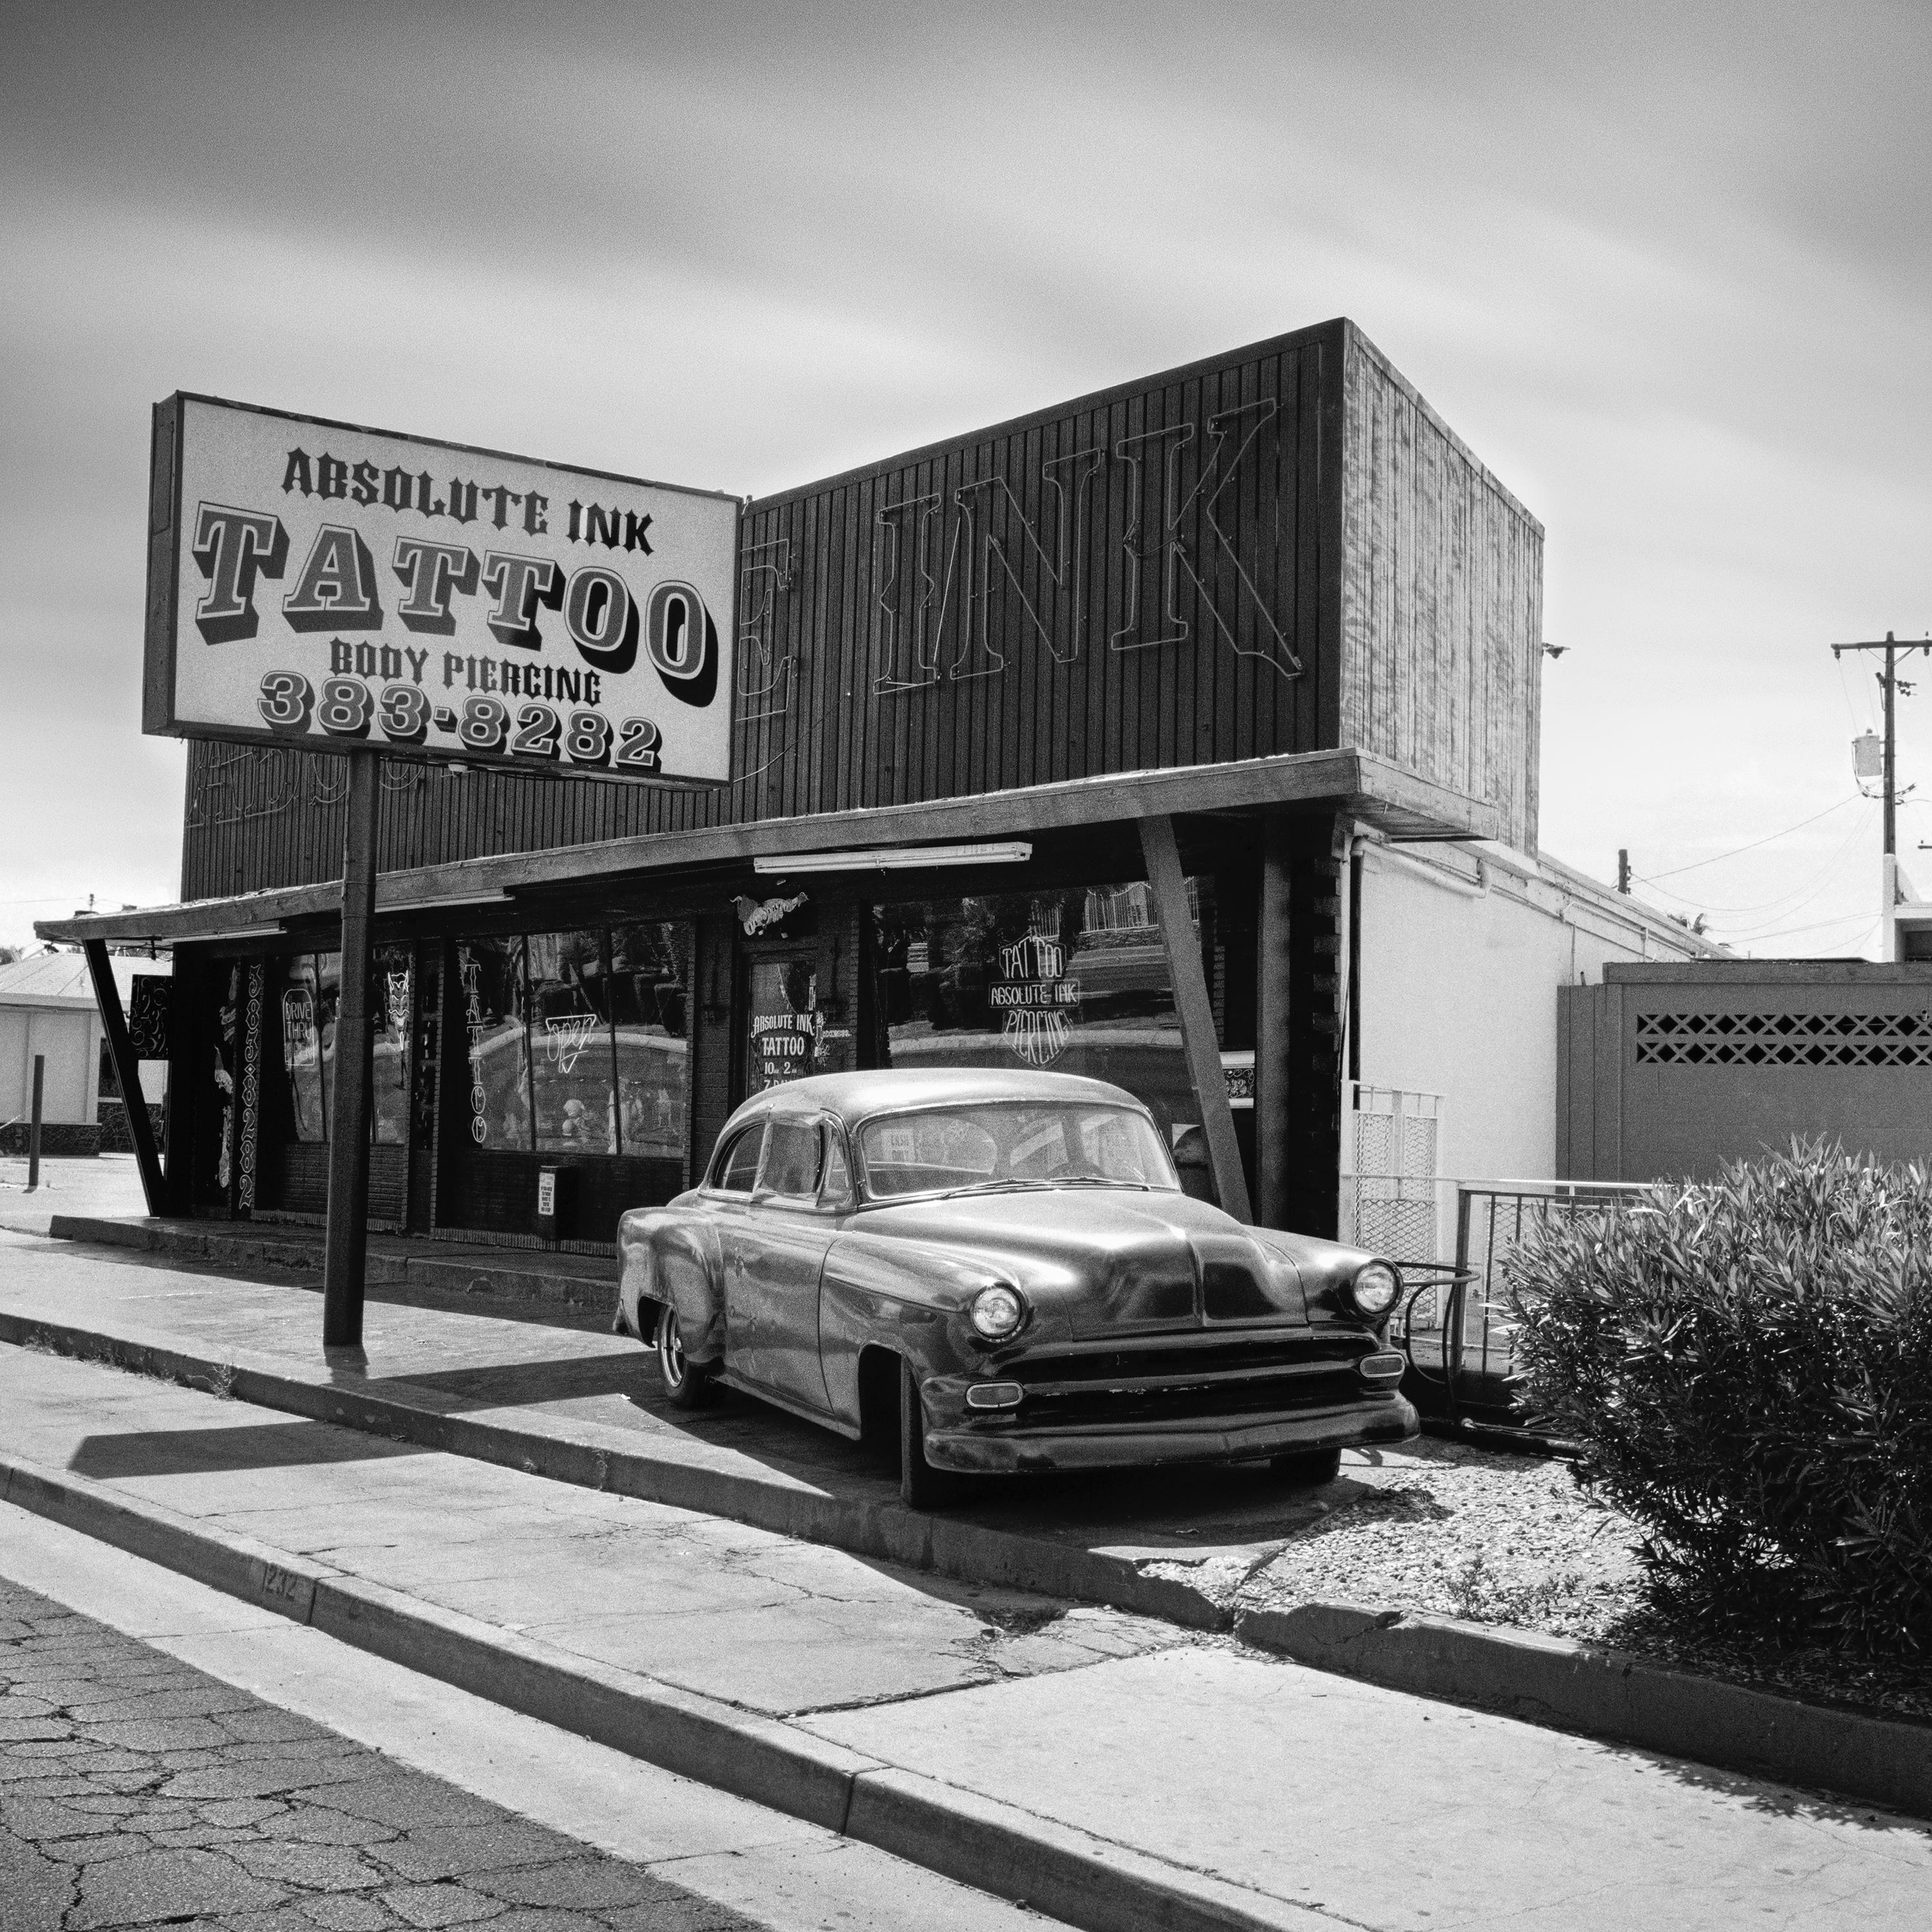 Black and white fine art landscape photography. Absolute Ink Tattoo with classic us car in las Vegas, Nevada, USA. Archival pigment ink print as part of a limited edition of 9. All Gerald Berghammer prints are made to order in limited editions on